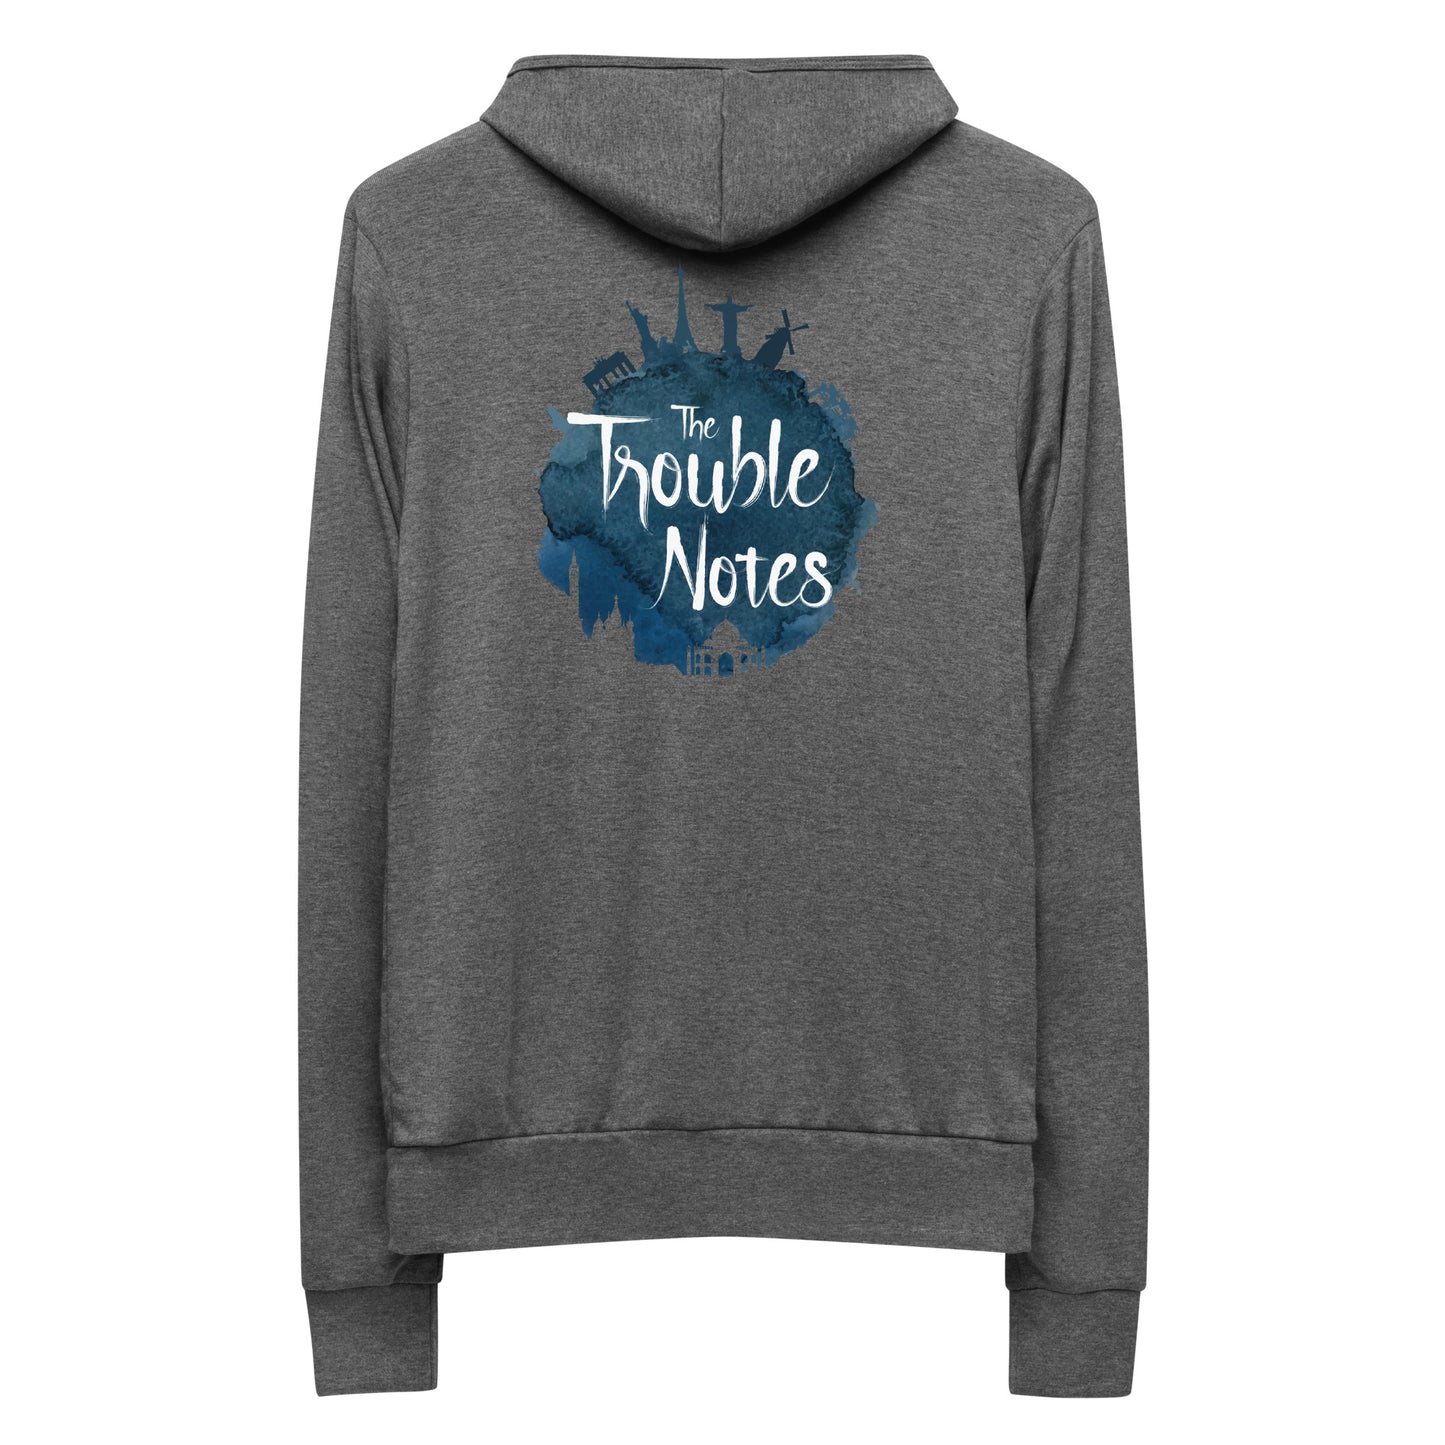 The Trouble Notes "Both Logos" WHITE (Print) Unisex Zip Hoodie